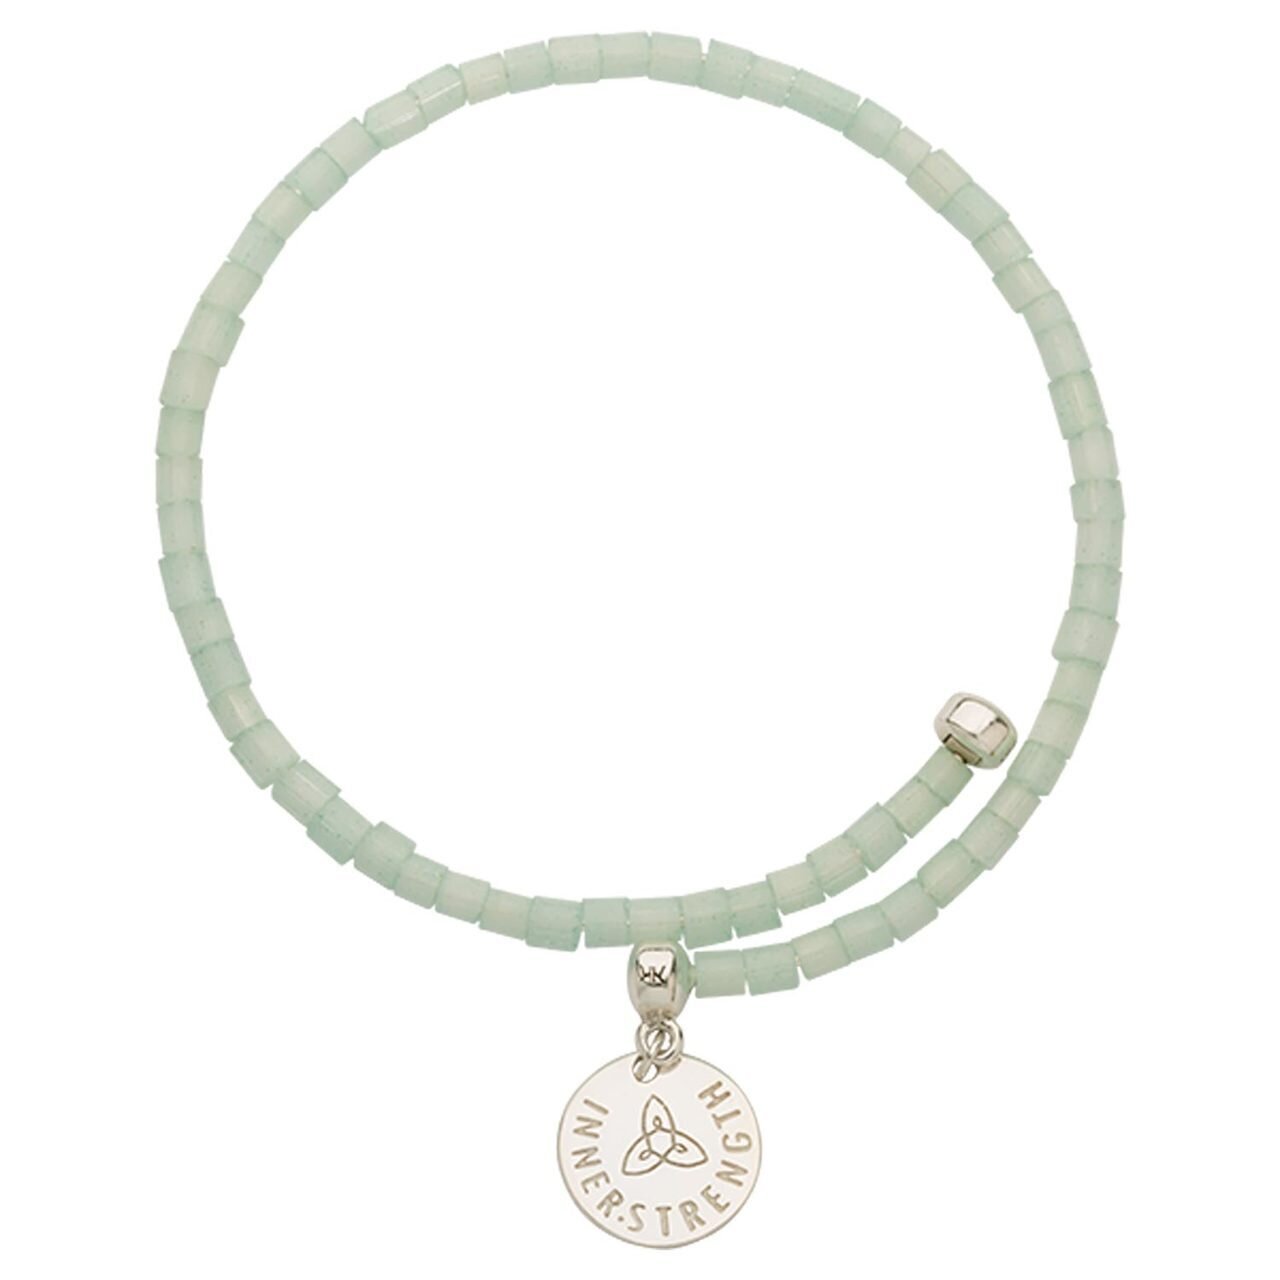 Nikki Lissoni Spiral Bead Bangle Silver-plated with Sea Green Beads In 19cm B1136S19